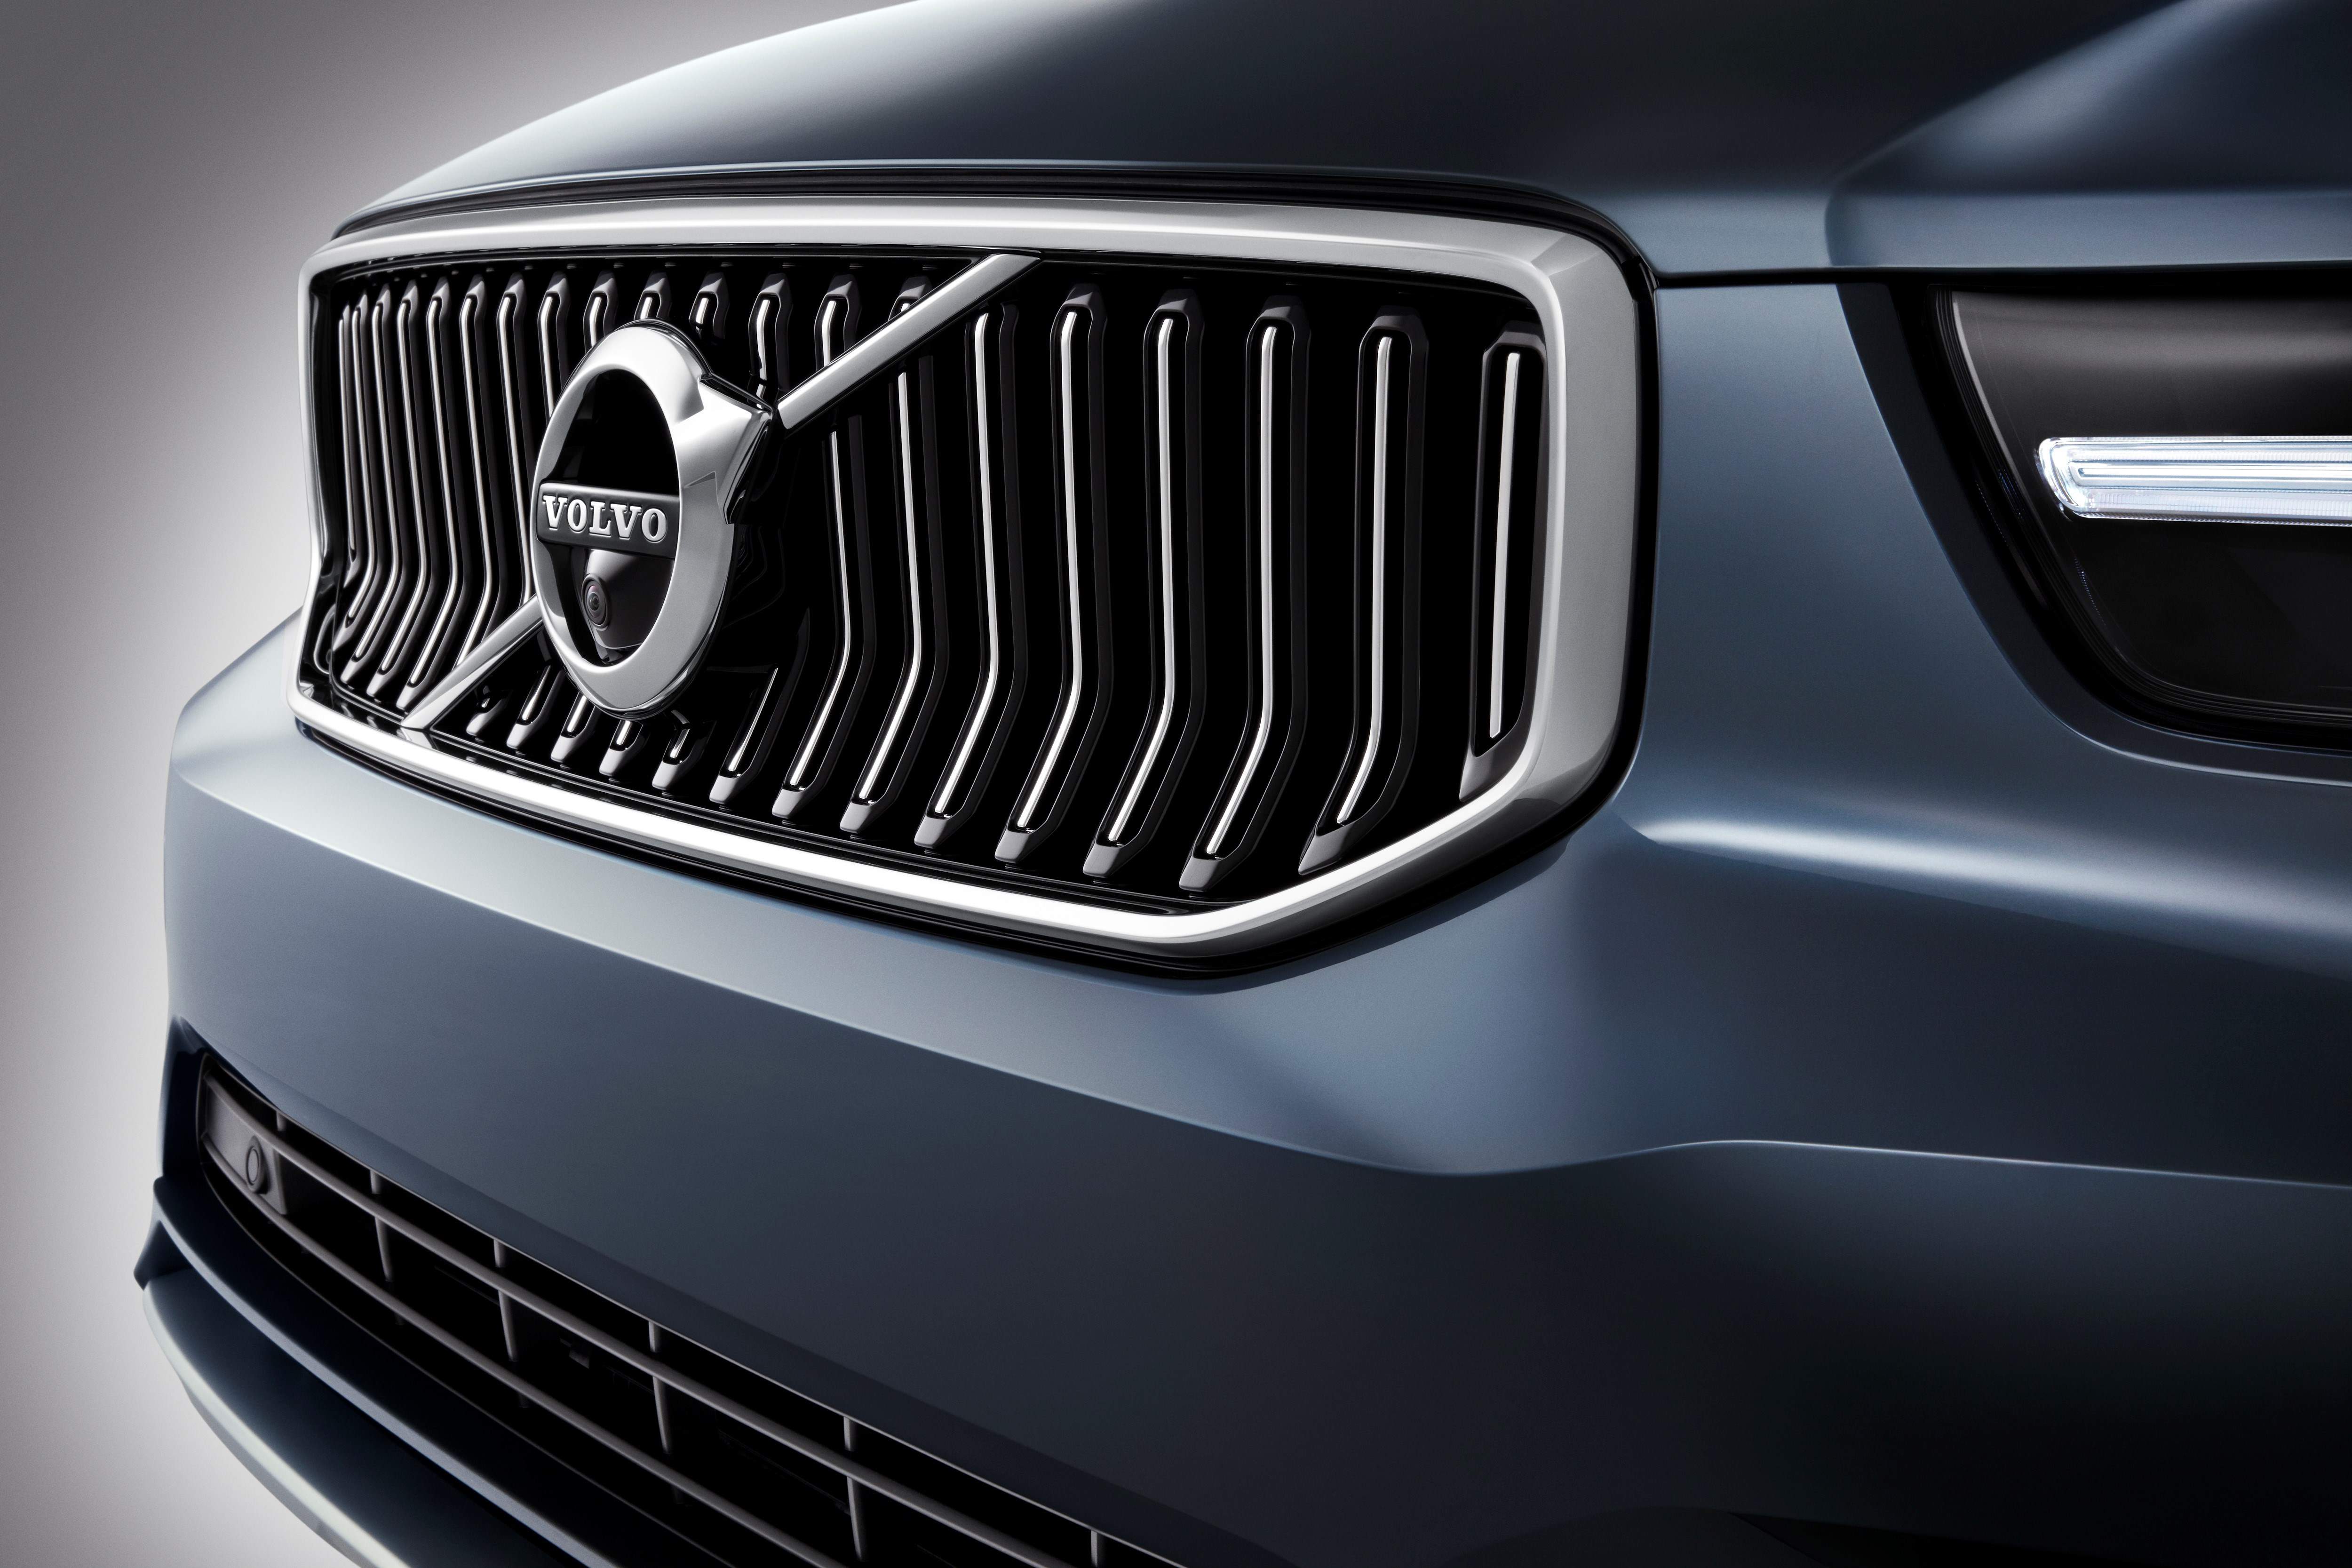 Volvo's leasing revenues down by 30% in first quarter